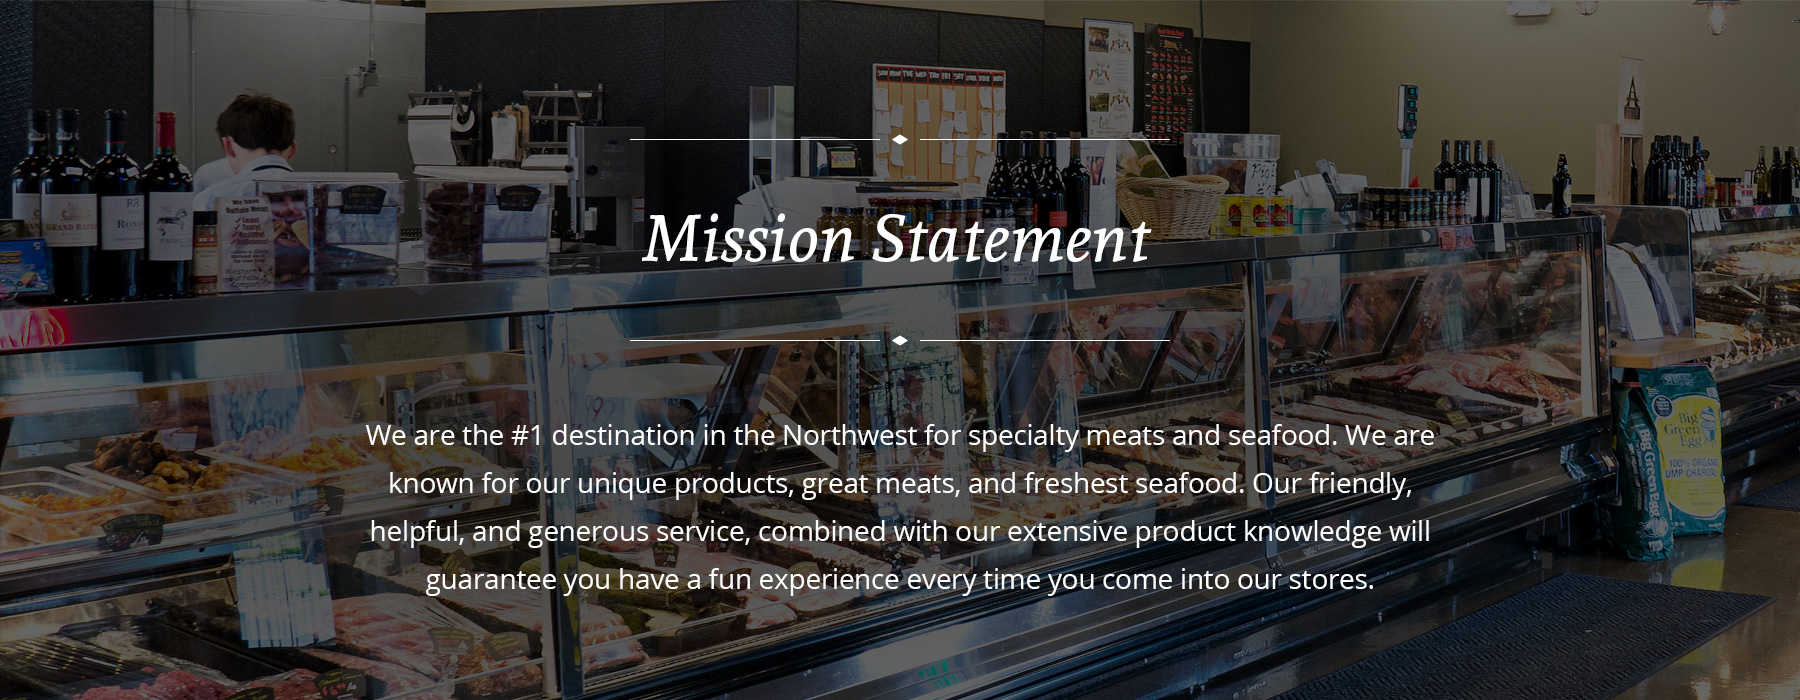 B & E Meats and Seafood Mission